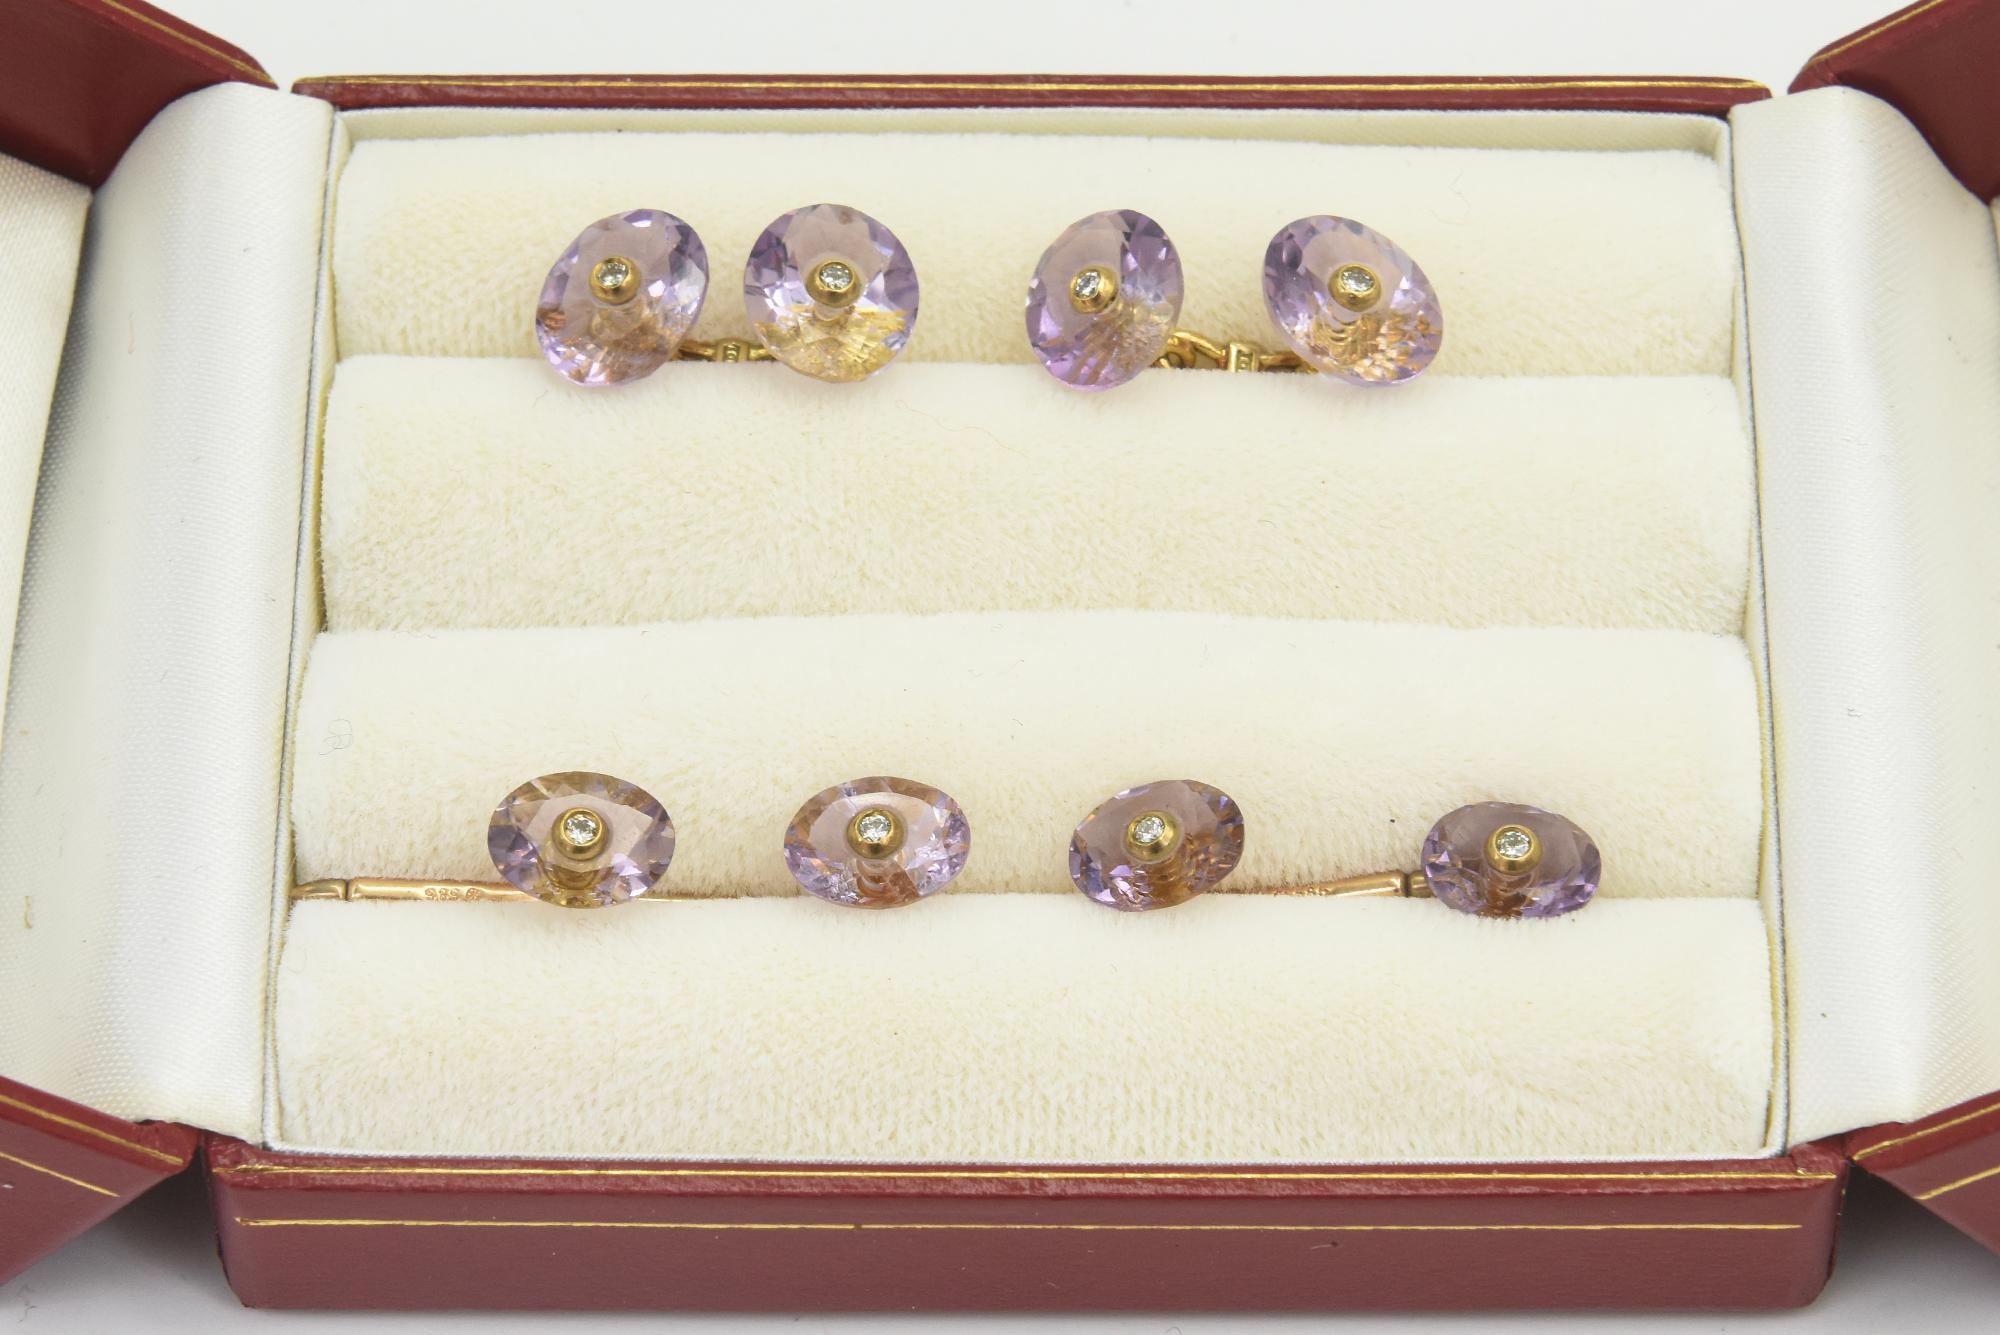 Simply elegant faceted oval amethyst with bezel diamond centers cufflinks and matching 4 stud buttons mounted in 18k yellow gold.  The cufflinks are double sided with an 18k bar in-between.  The oval sections measure .39